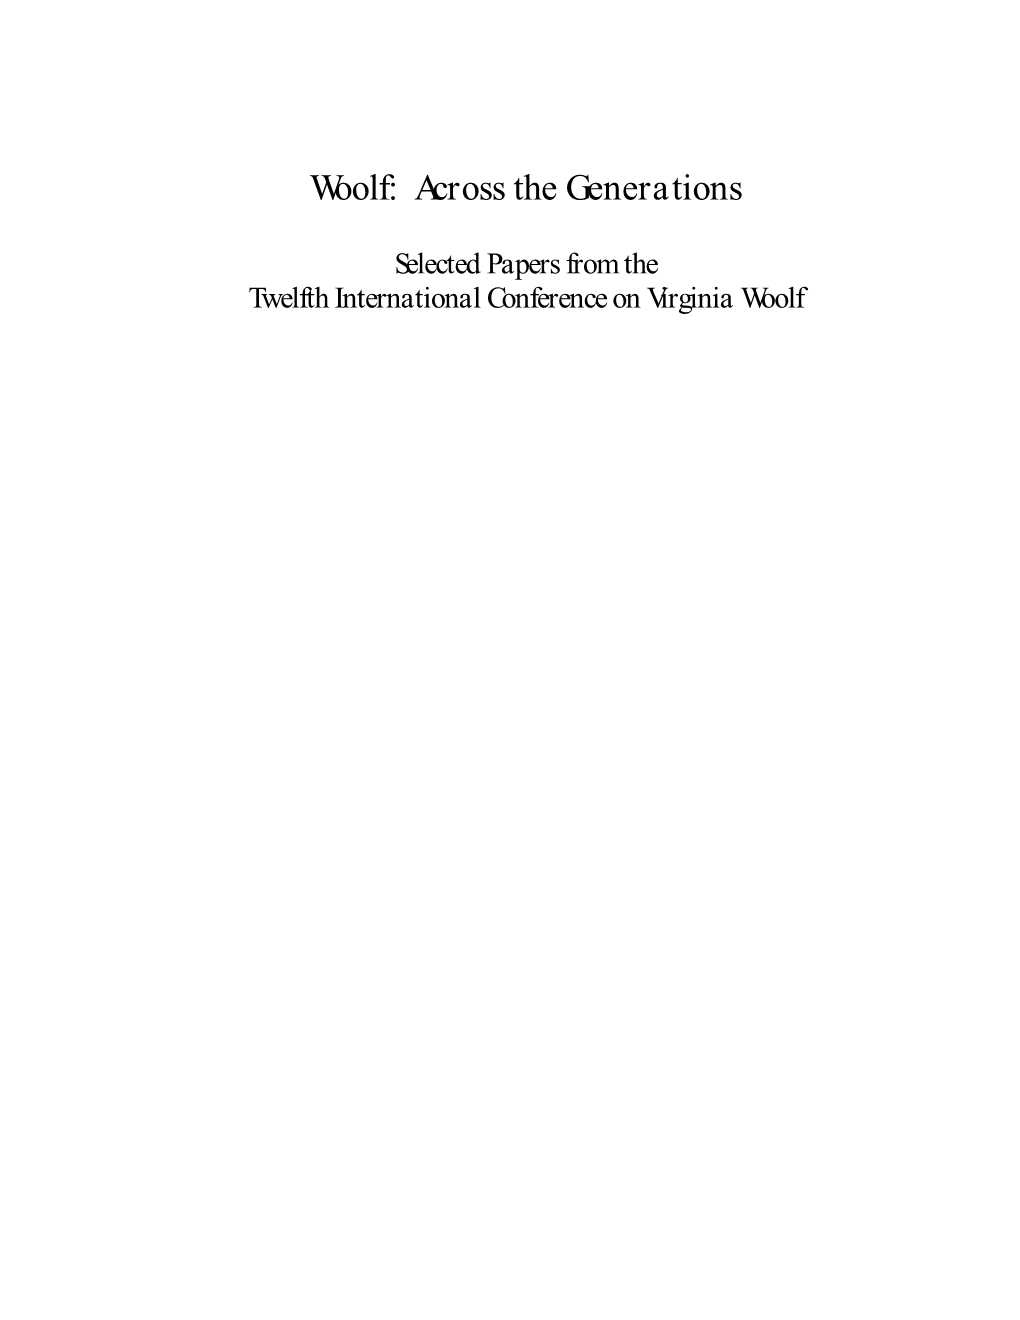 Woolf: Across the Generations